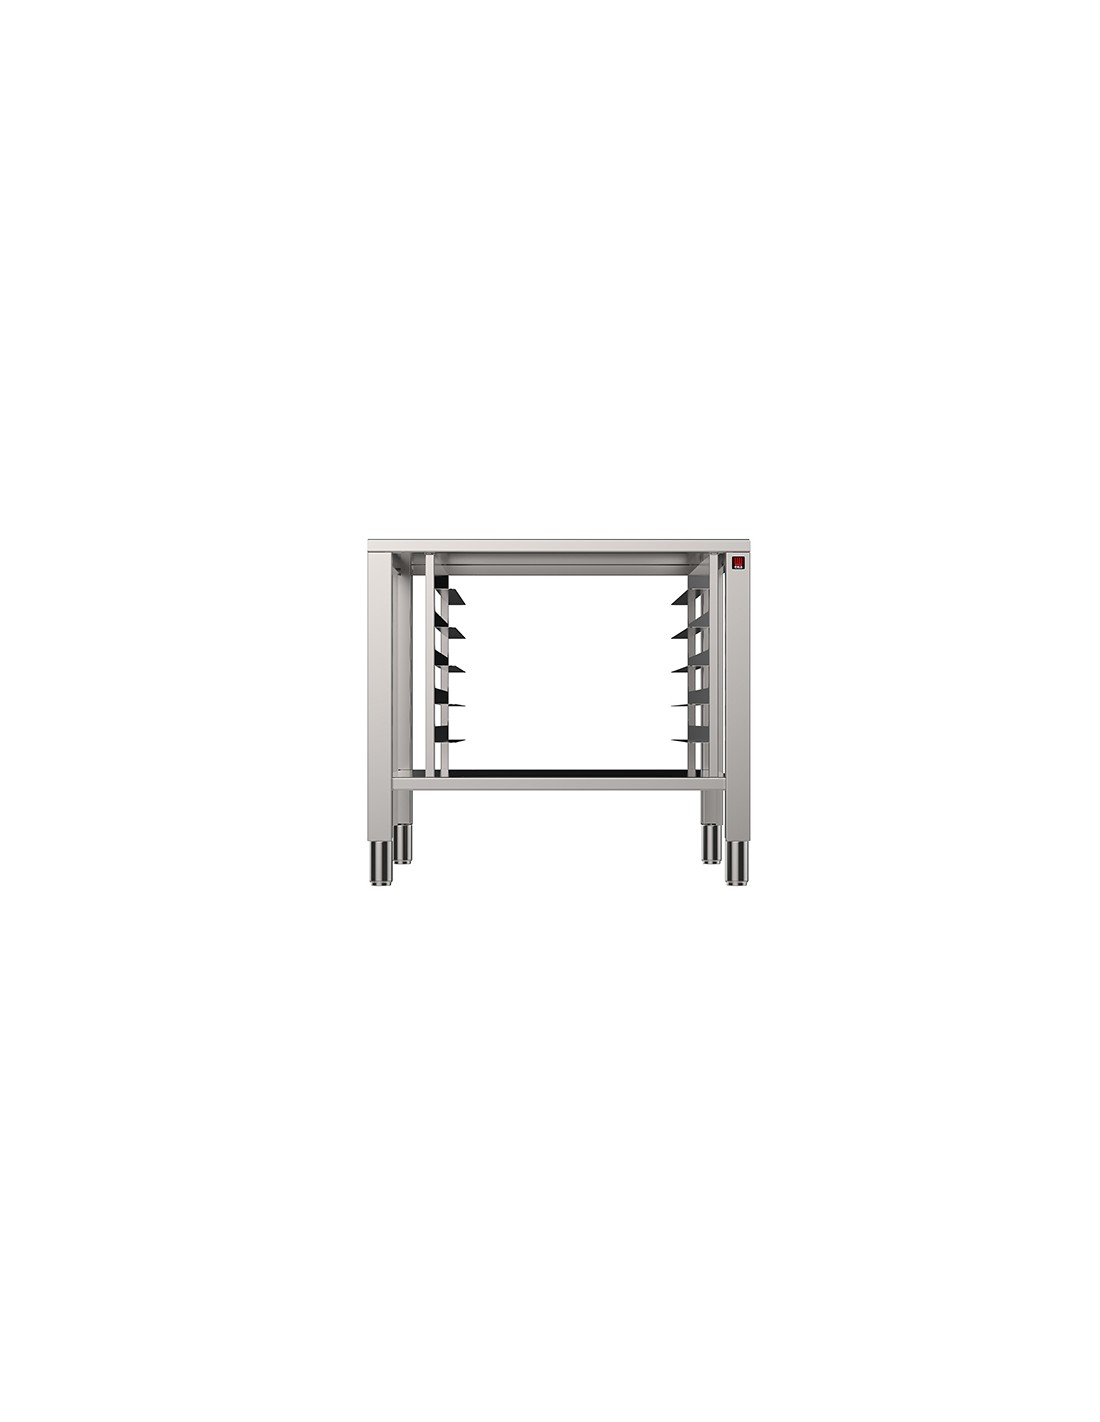 Fixed table - Acciaio inox AISI 430 - With supports - Dimensions cm 85 x 106 x 77 h